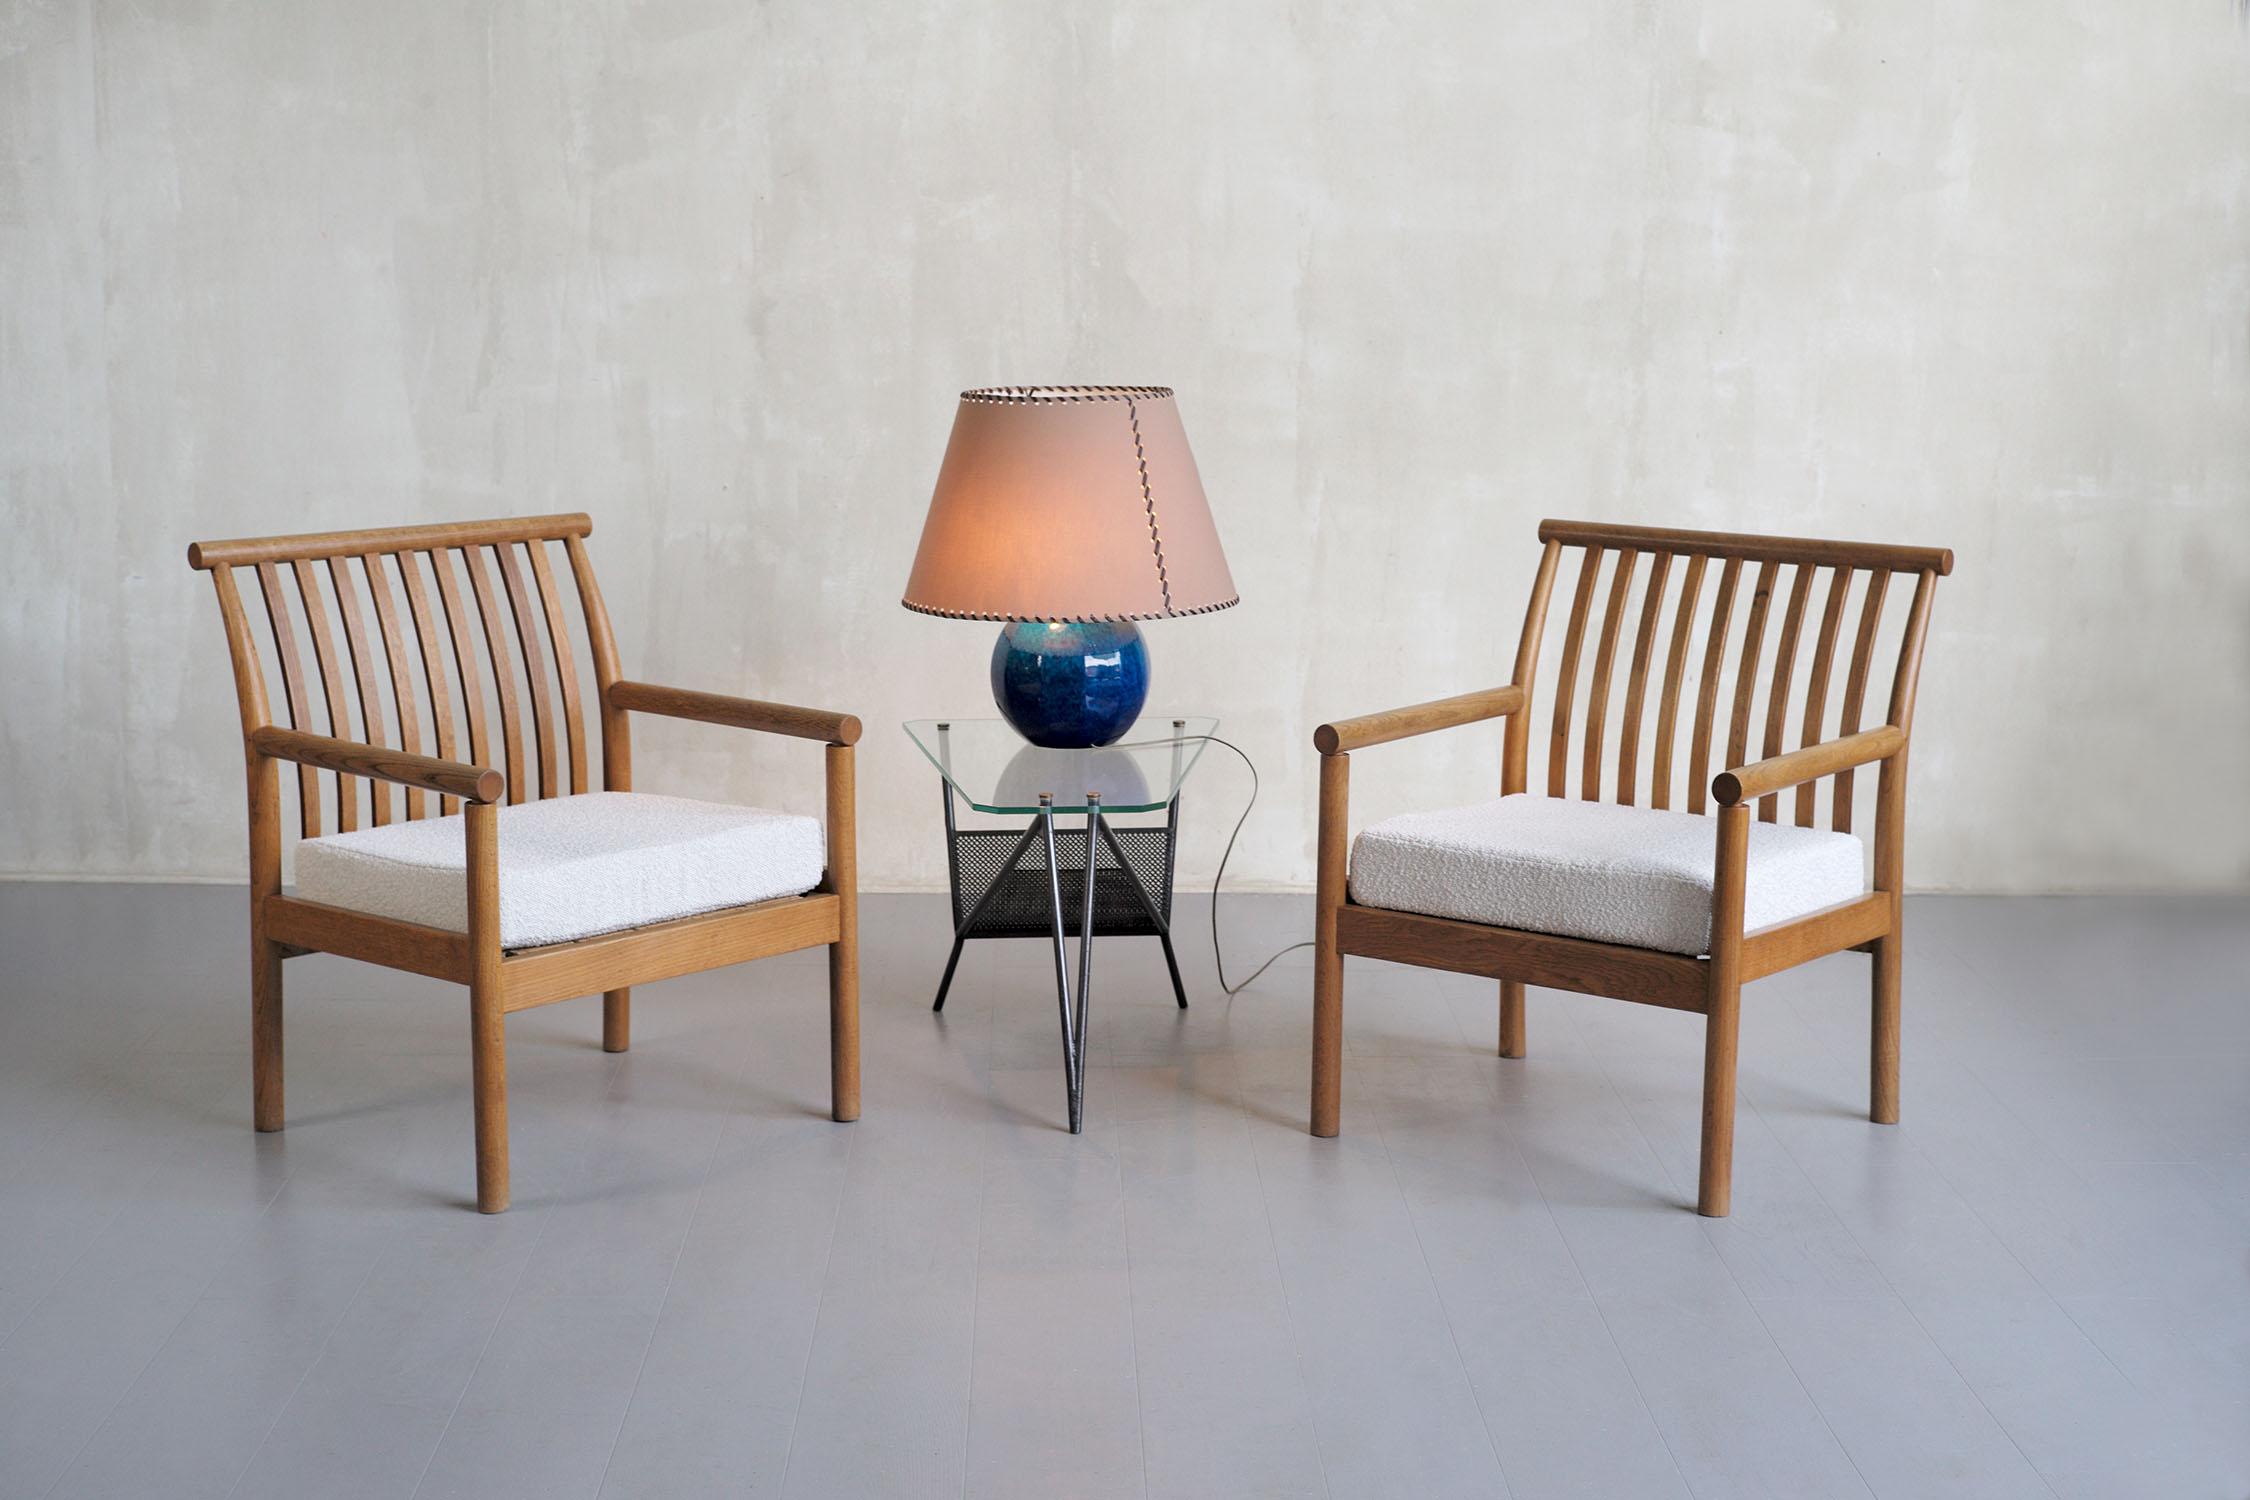 Isamu Kenmochi, Pair of Curved Oak Armchairs, Japan, 1960 For Sale 5